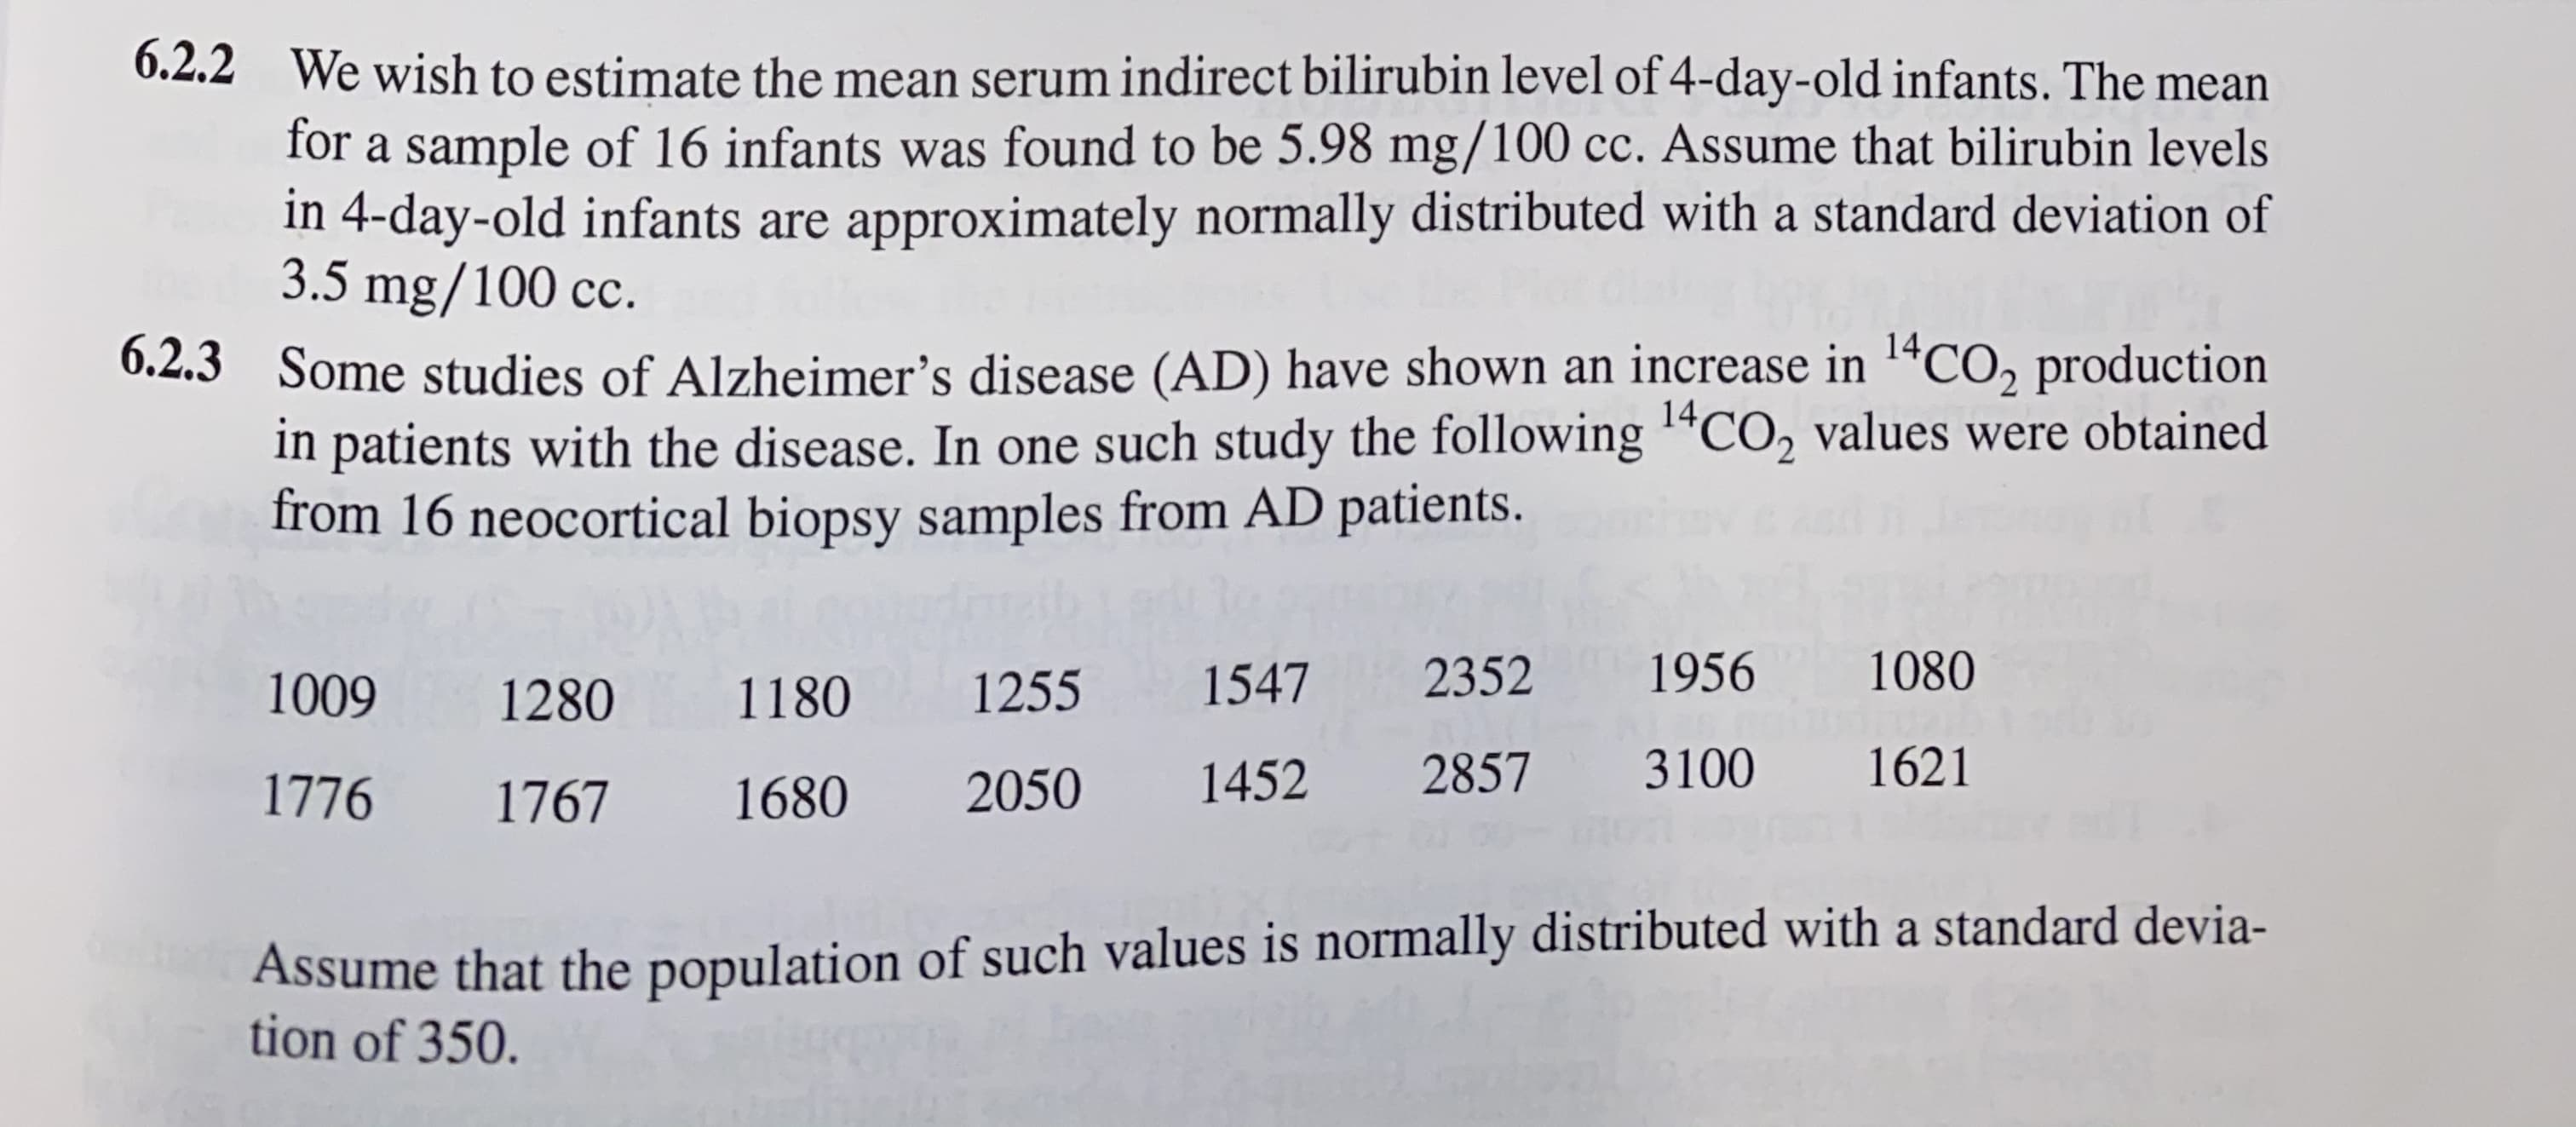 6.2.2 We wish to estimate the mean serum indirect bilirubin level of 4-day-old infants. The mean
for a sample of 16 infants was found to be 5.98 mg/100 cc. Assume that bilirubin levels
in 4-day-old infants are approximately normally distributed with a standard deviation of
3.5 mg/100 c.
0.2.3 Some studies of Alzheimer's disease (AD) have shown an increase in 1ªCO, production
in patients with the disease. In one such study the following “CO, values were obtained
from 16 neocortical biopsy samples from AD patients.
14
1009
1280
1180
1255
1547
2352
1956
1080
1776
1767
1680
2050
1452
2857 3100
1621
Assume that the population of such values is normally distributed with a standard devia-
tion of 350.
